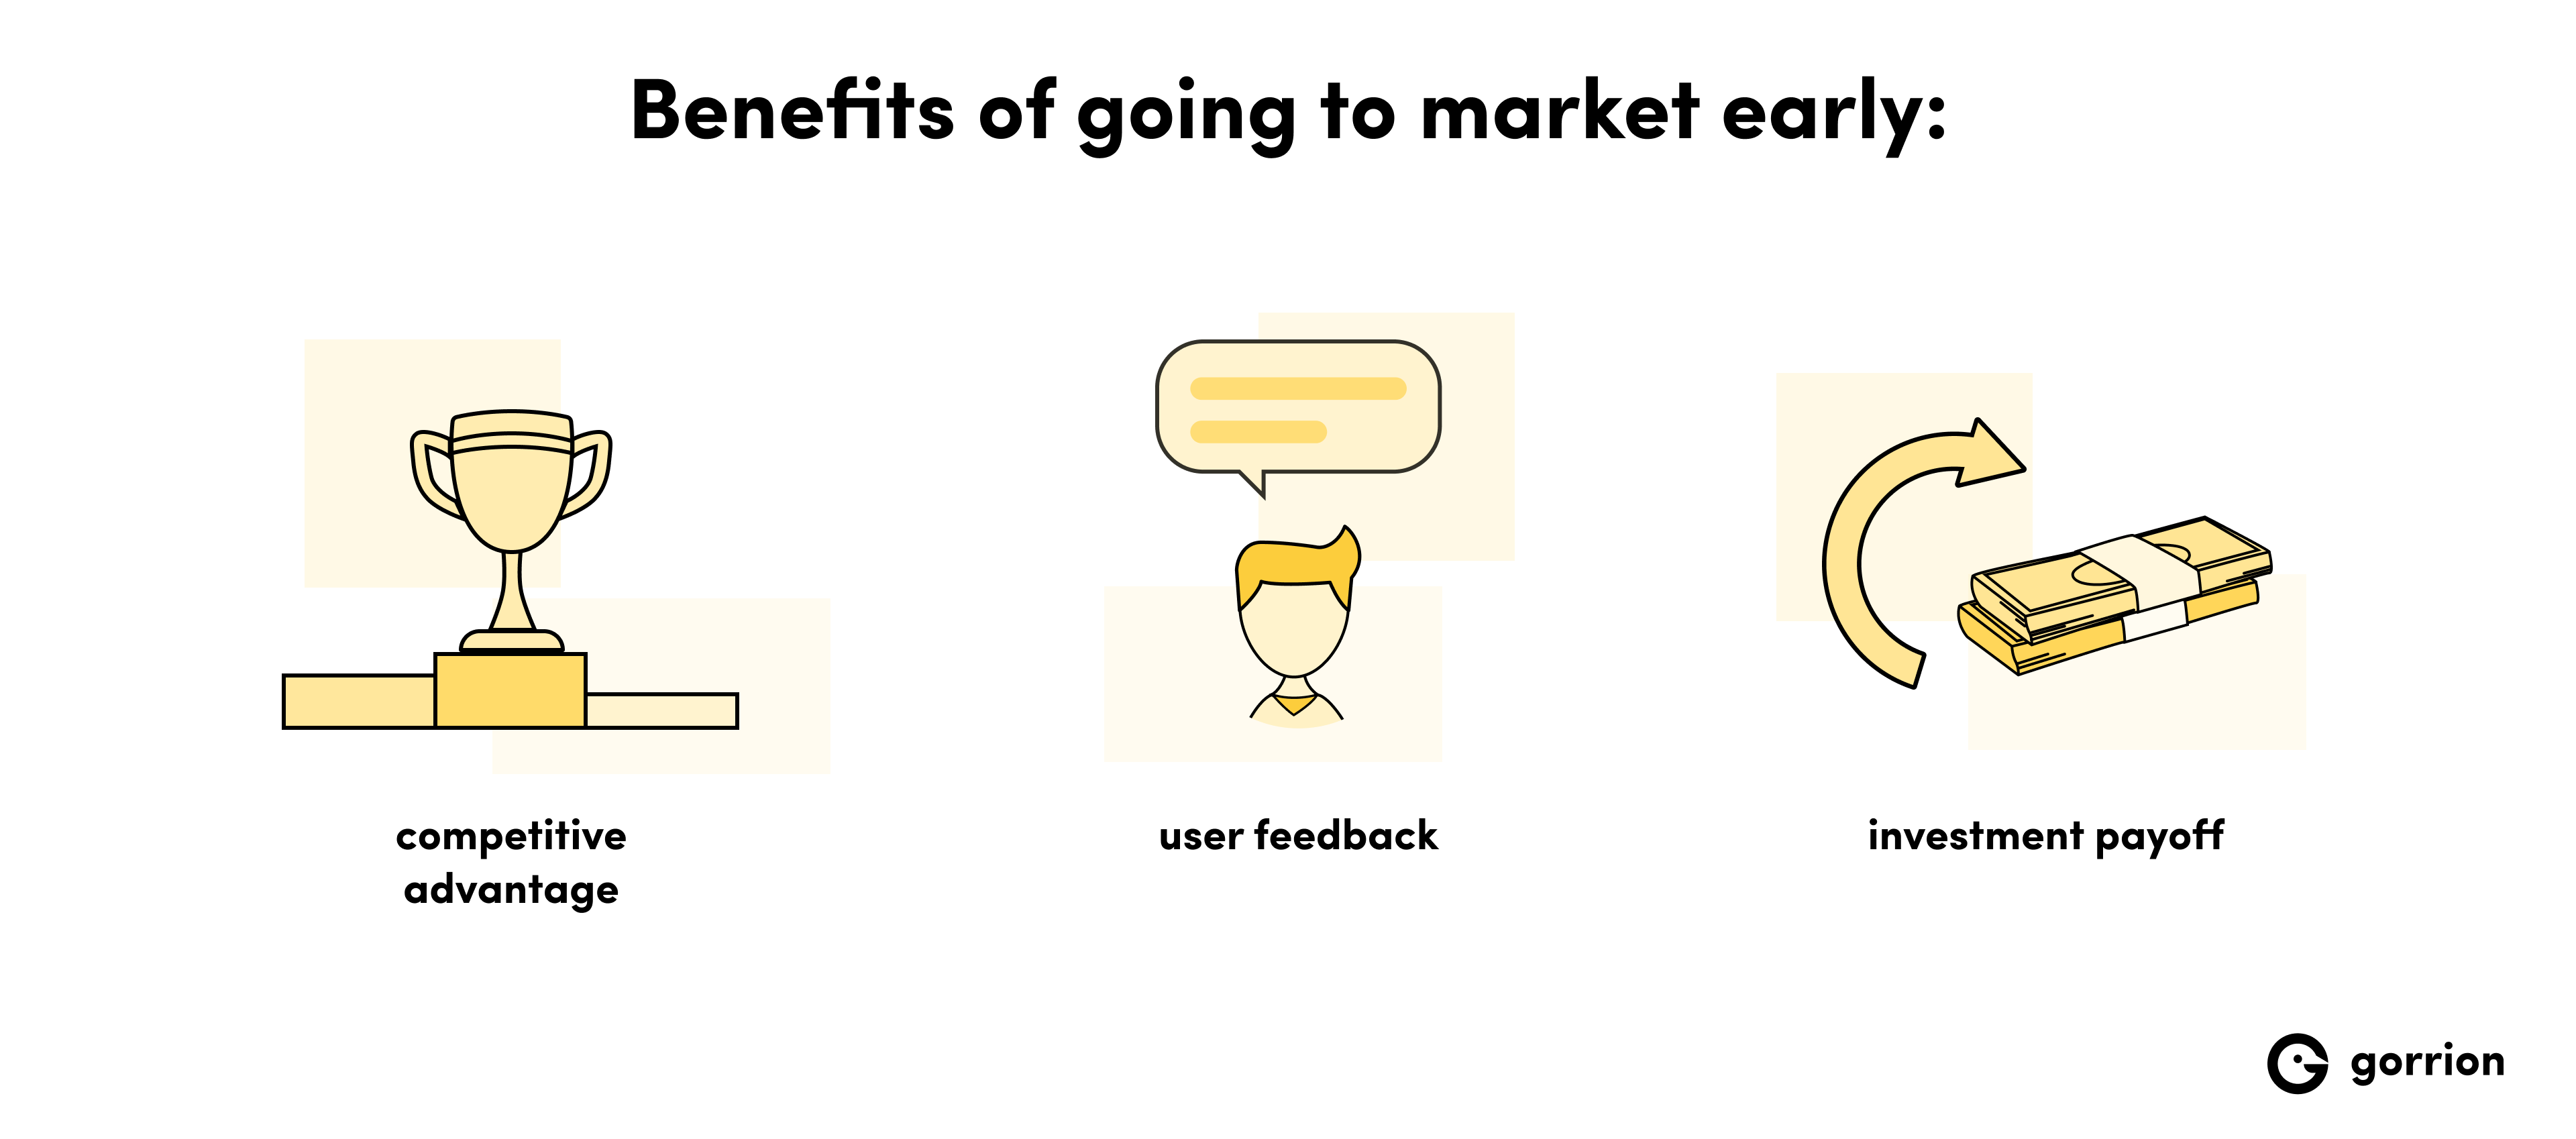 Benefits of going to market early include competitive advantage, user feedback, and earlier investment payoff.